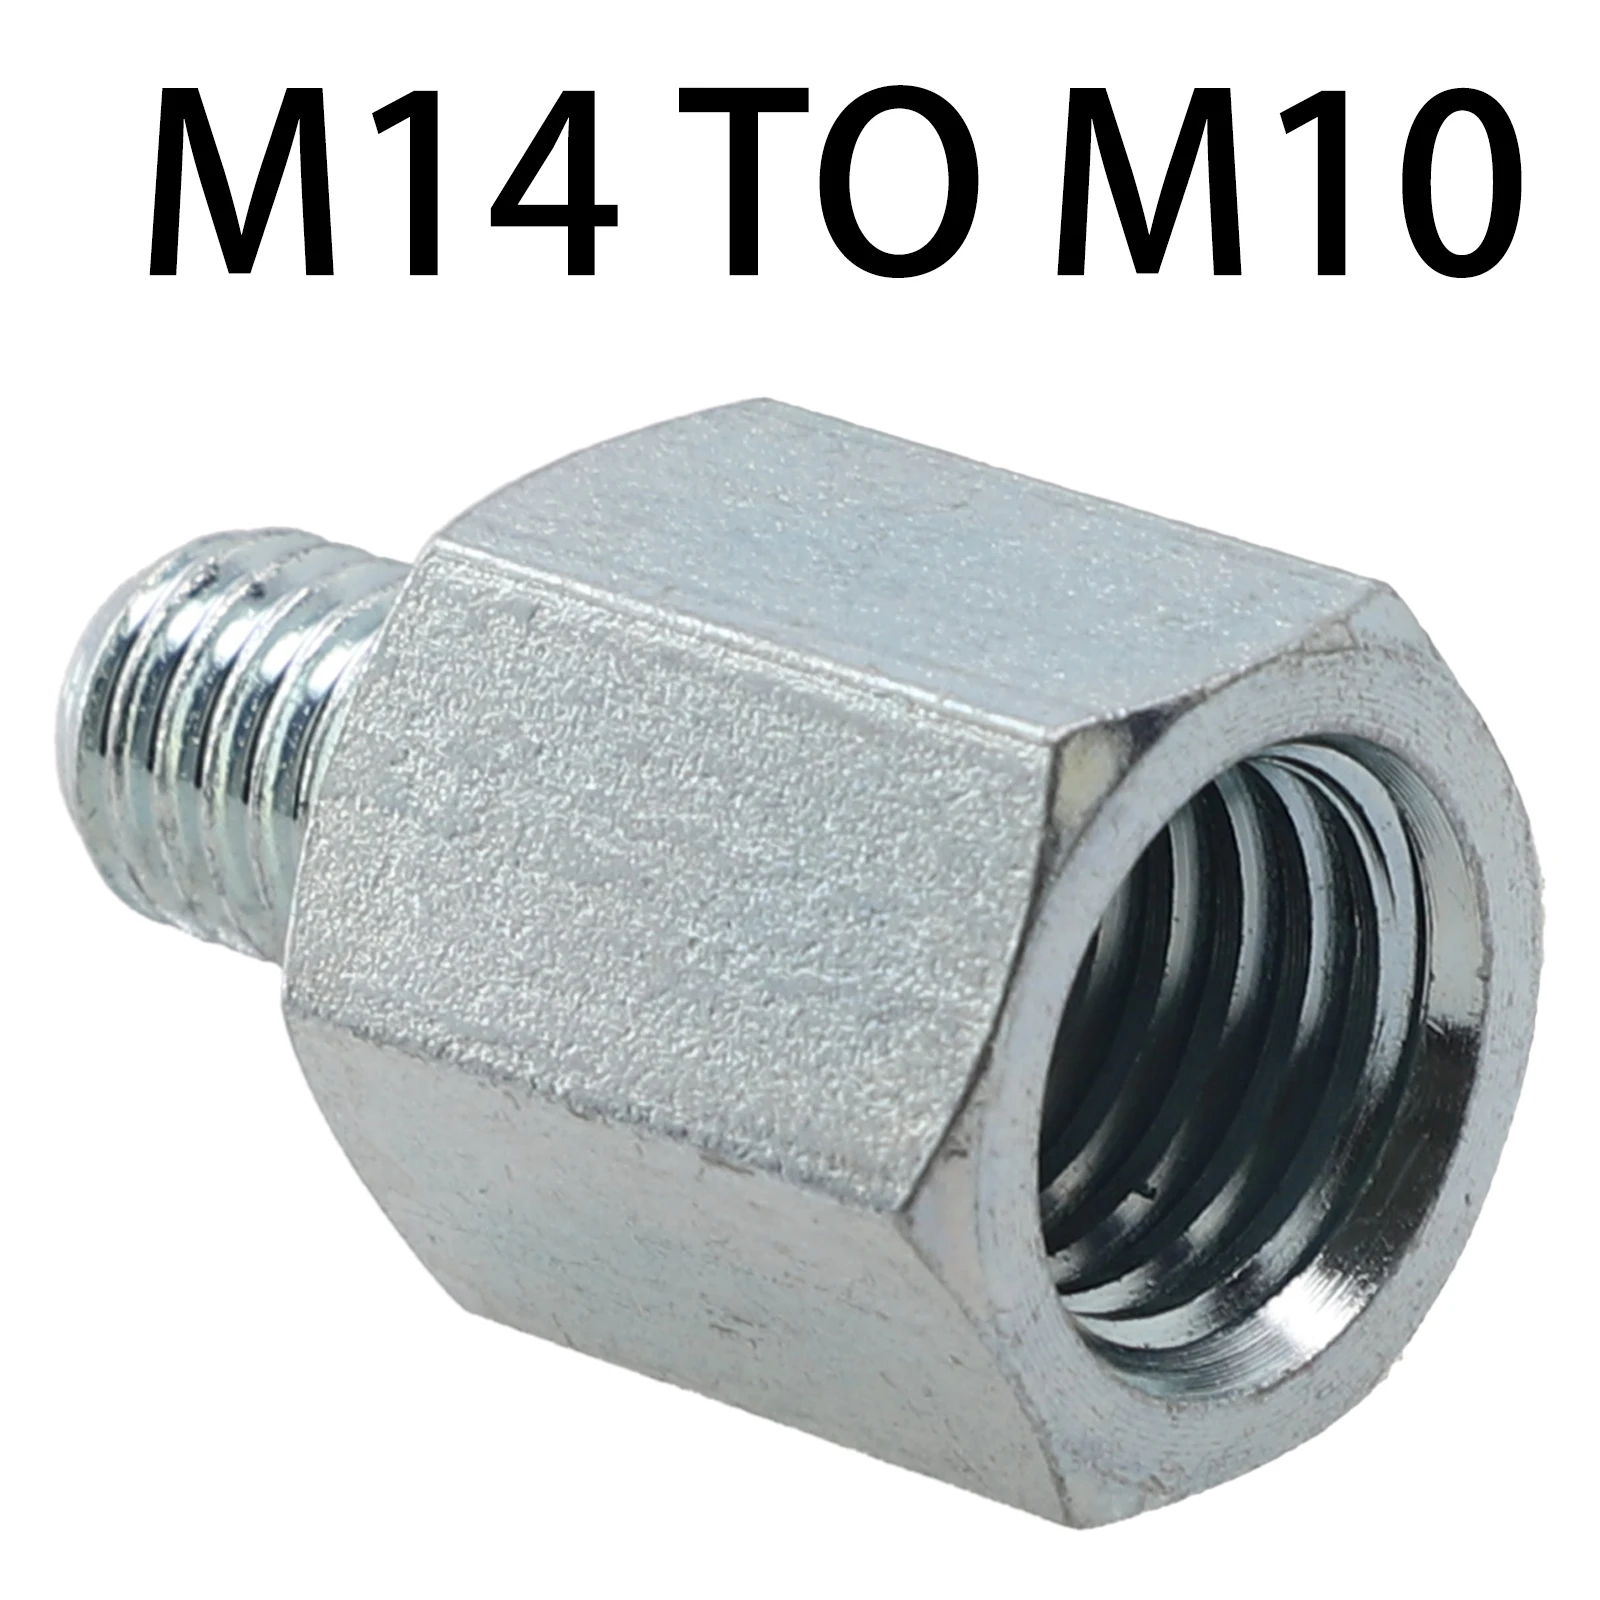 Angle Grinder Thread Adapter Connector Converter For Angle Grinder M10 To M14 M14 To M10 M14 To 5/8 -11 5/8 -11to M14 M16 To M14 m14 m1 grinder adapter converter and platen set angle grinder accessories connector screw nuts slotting different thread